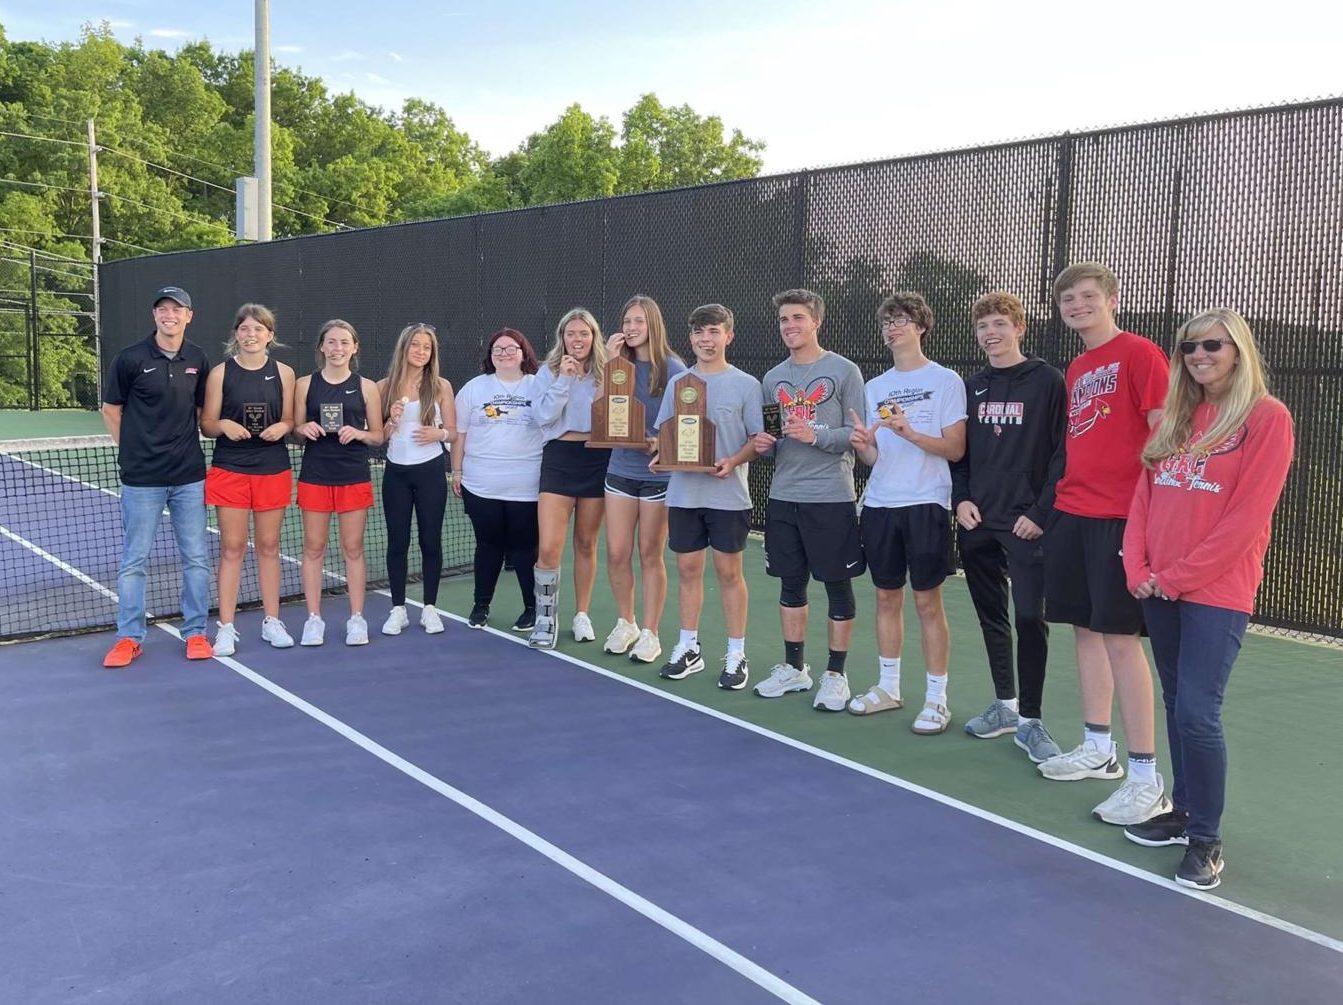 Baseline Tennis and Flames Tennis Squad on the road together!